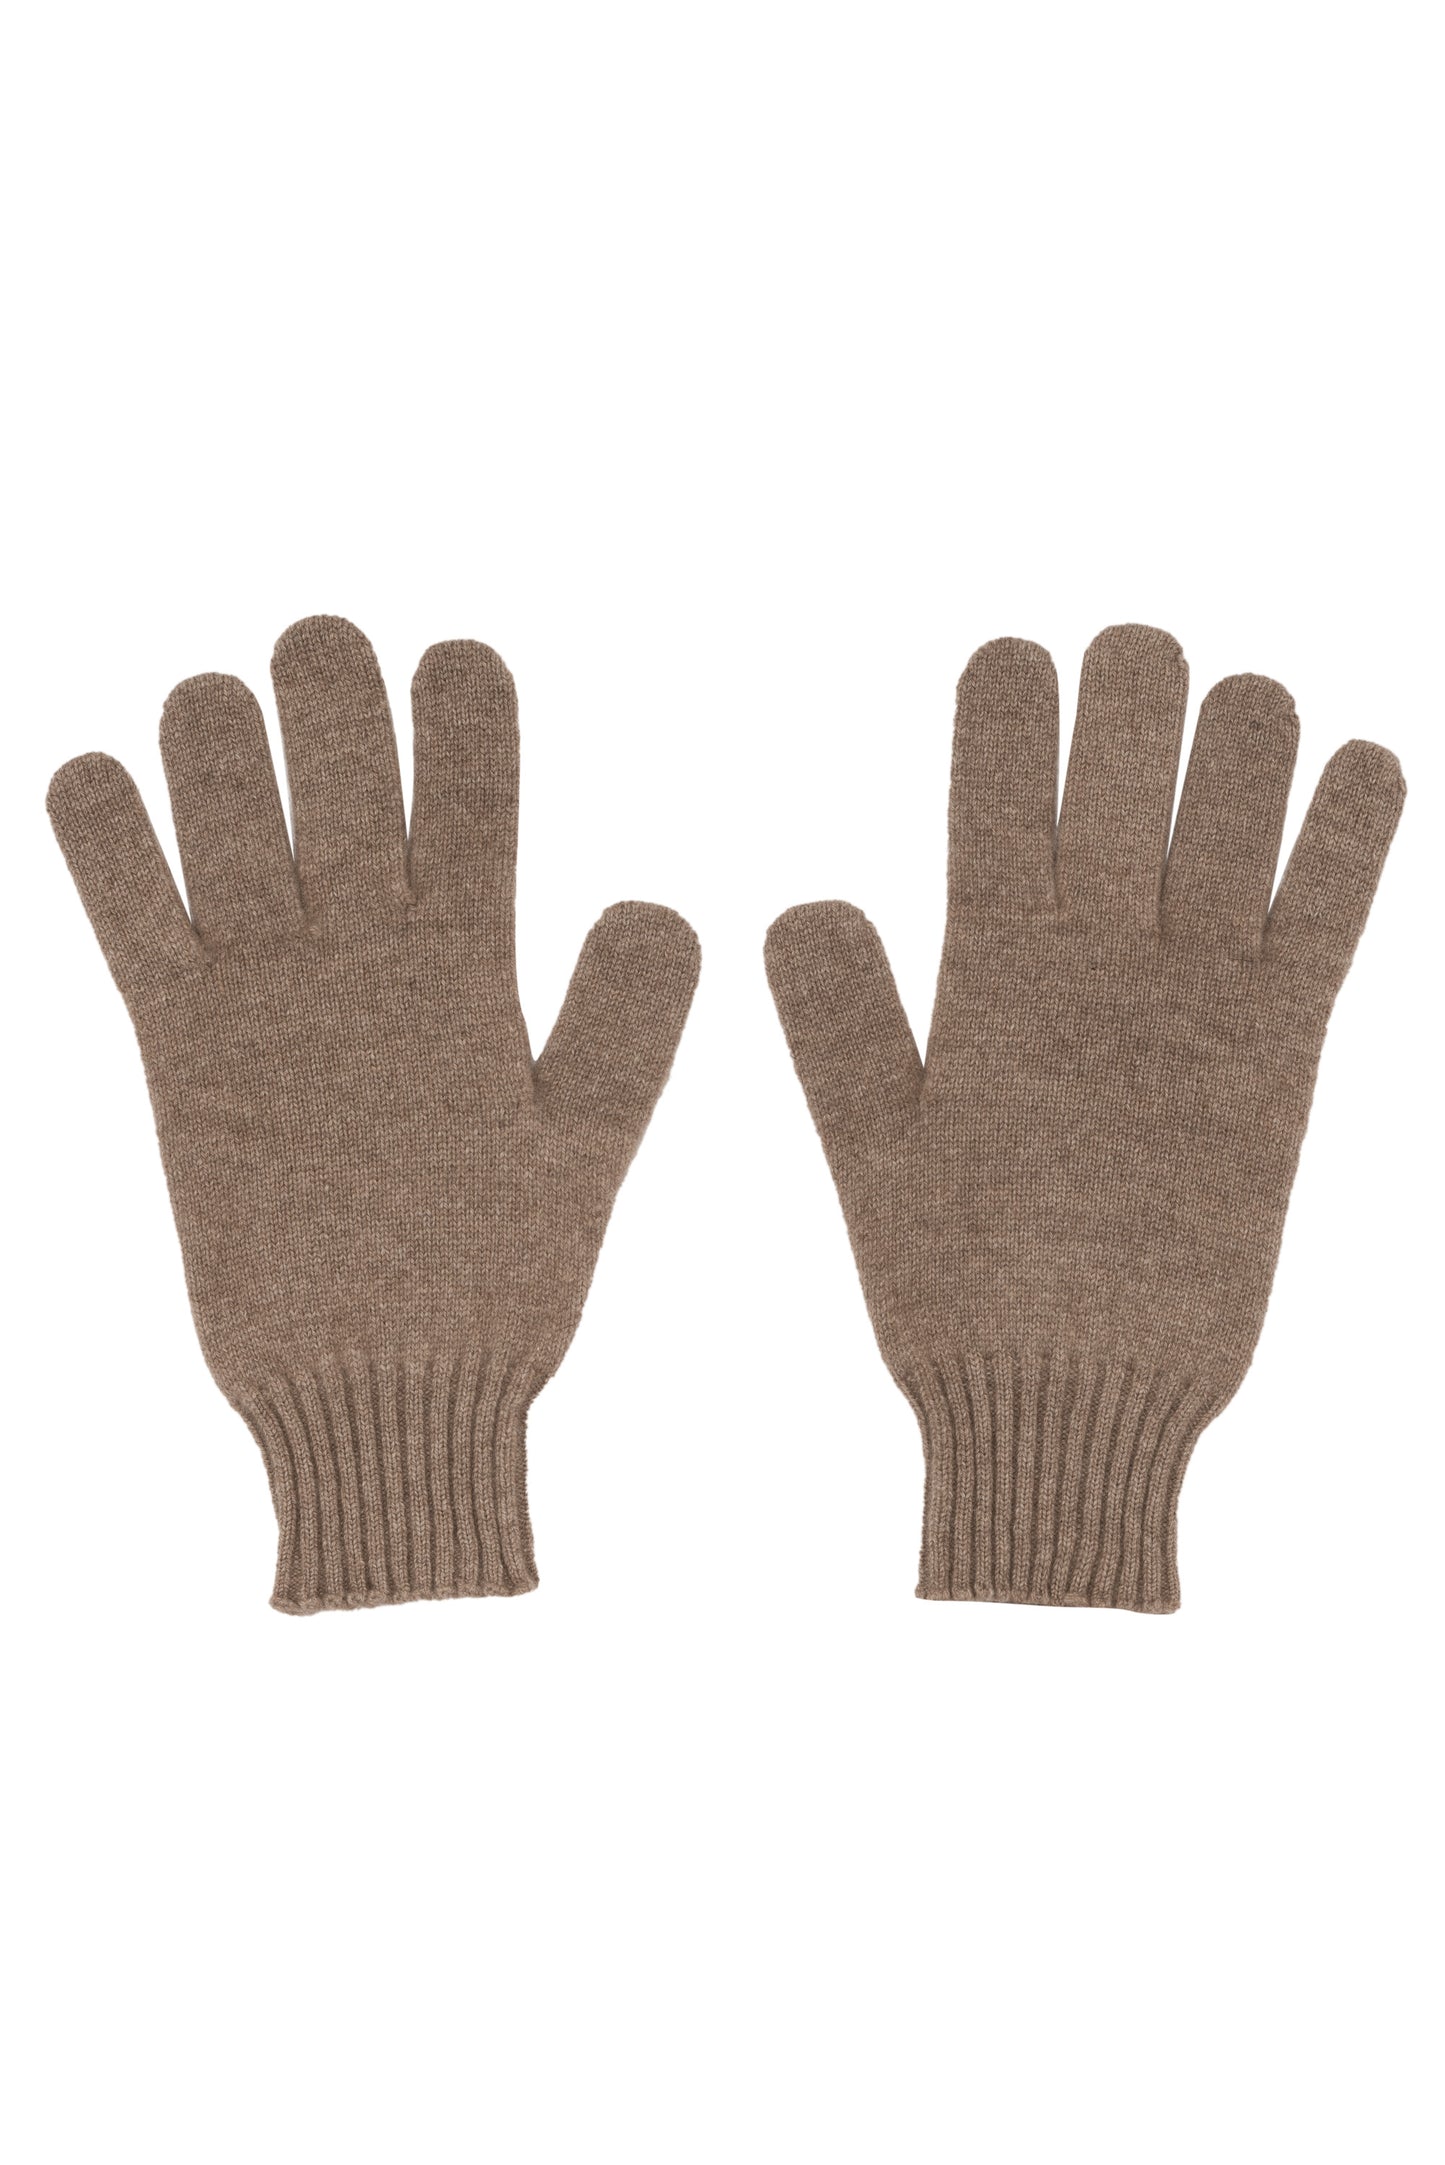 Taupe 100% Cashmere Men's Gloves